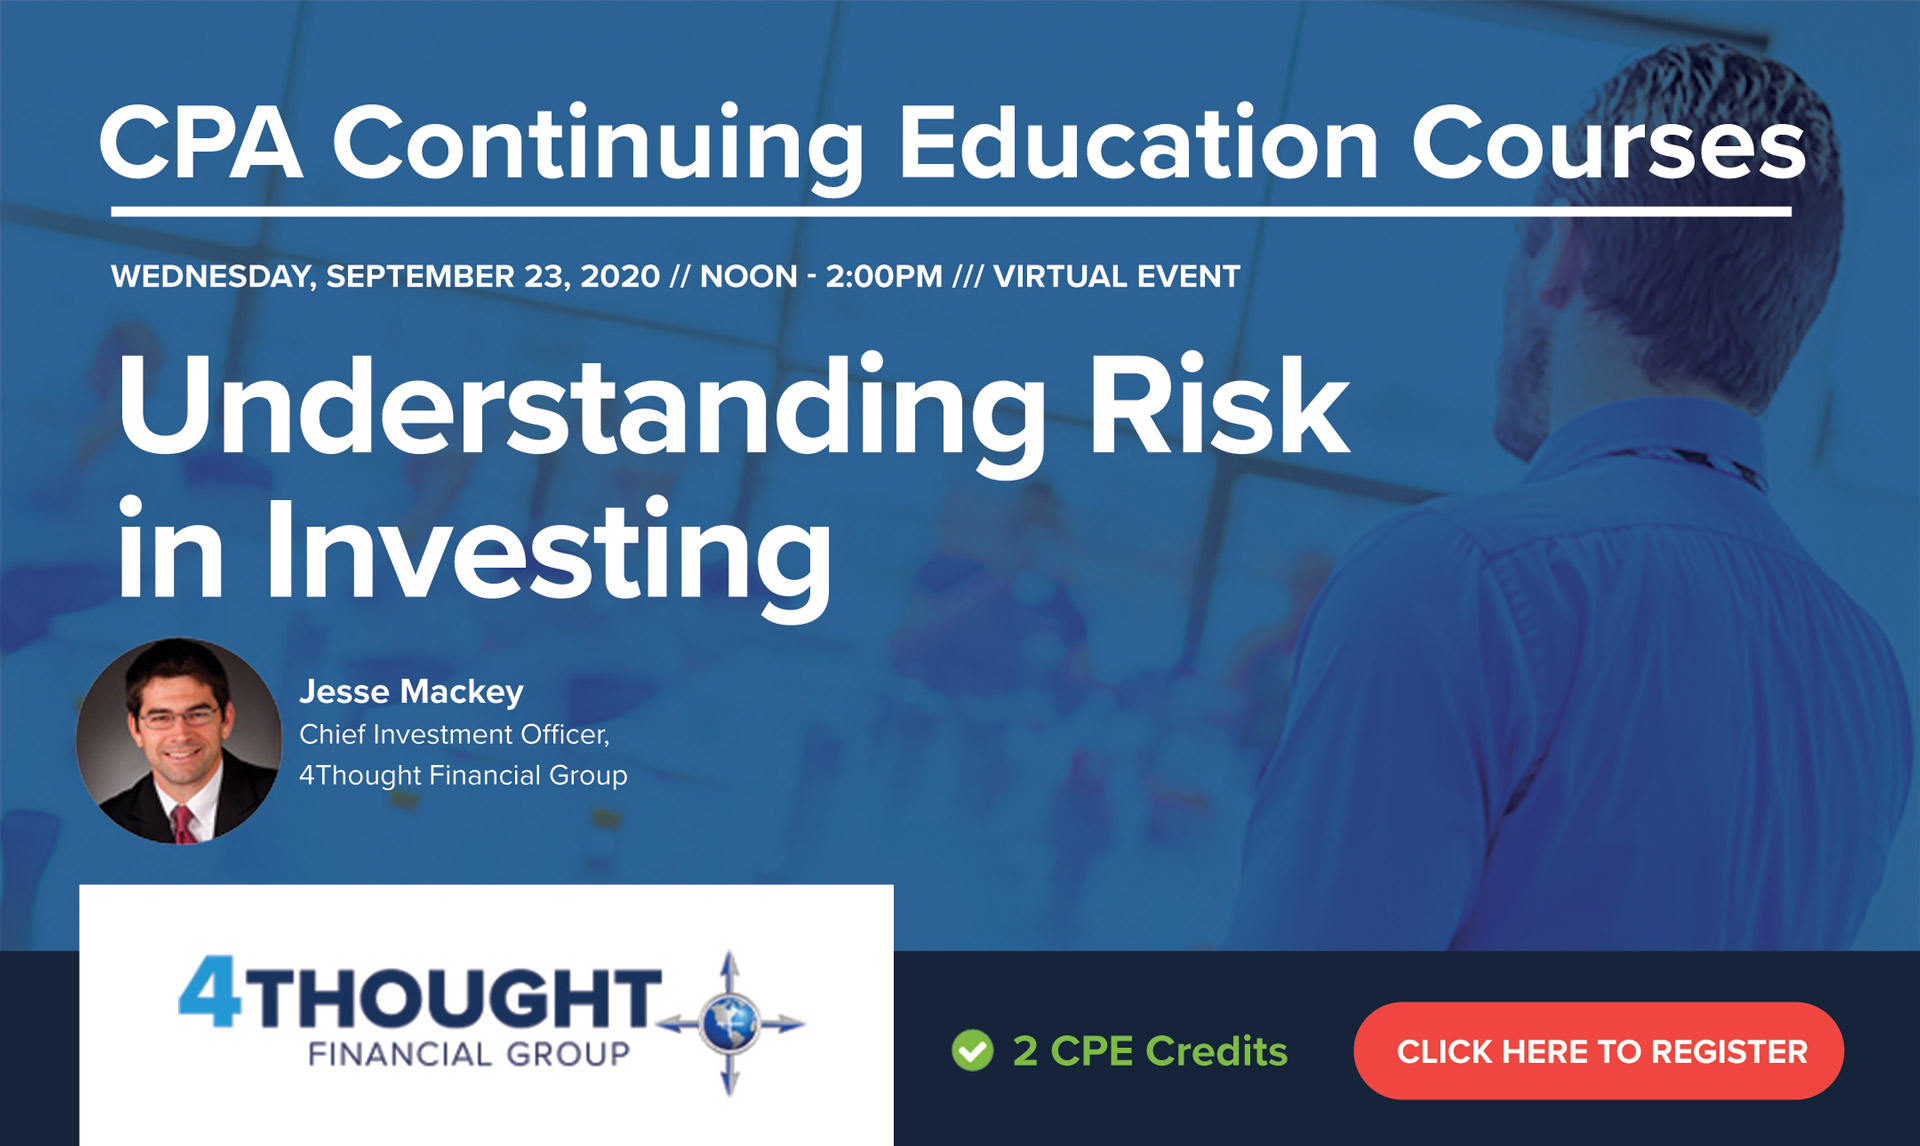 CPA Continuing Education Course: Understanding Risk in Investing